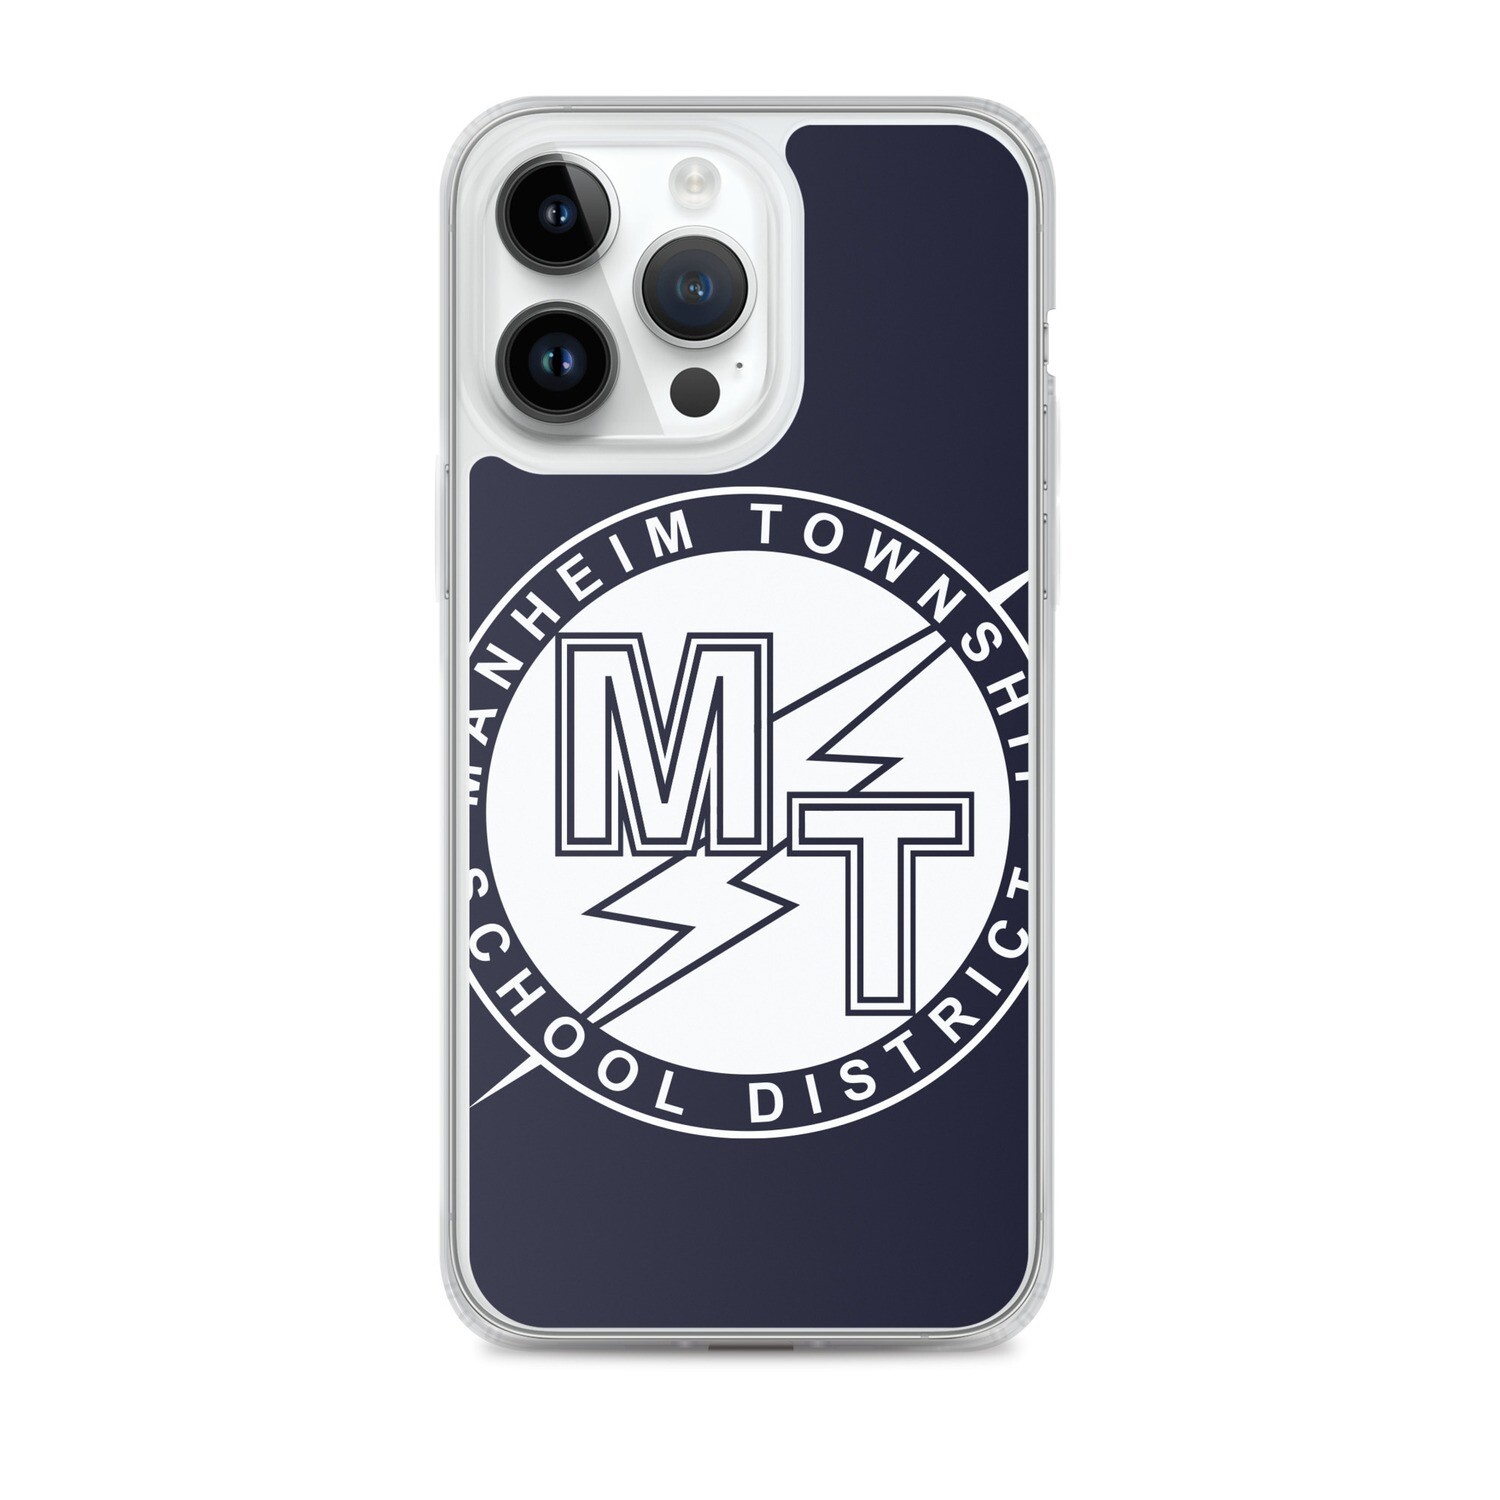 Township iPhone Case